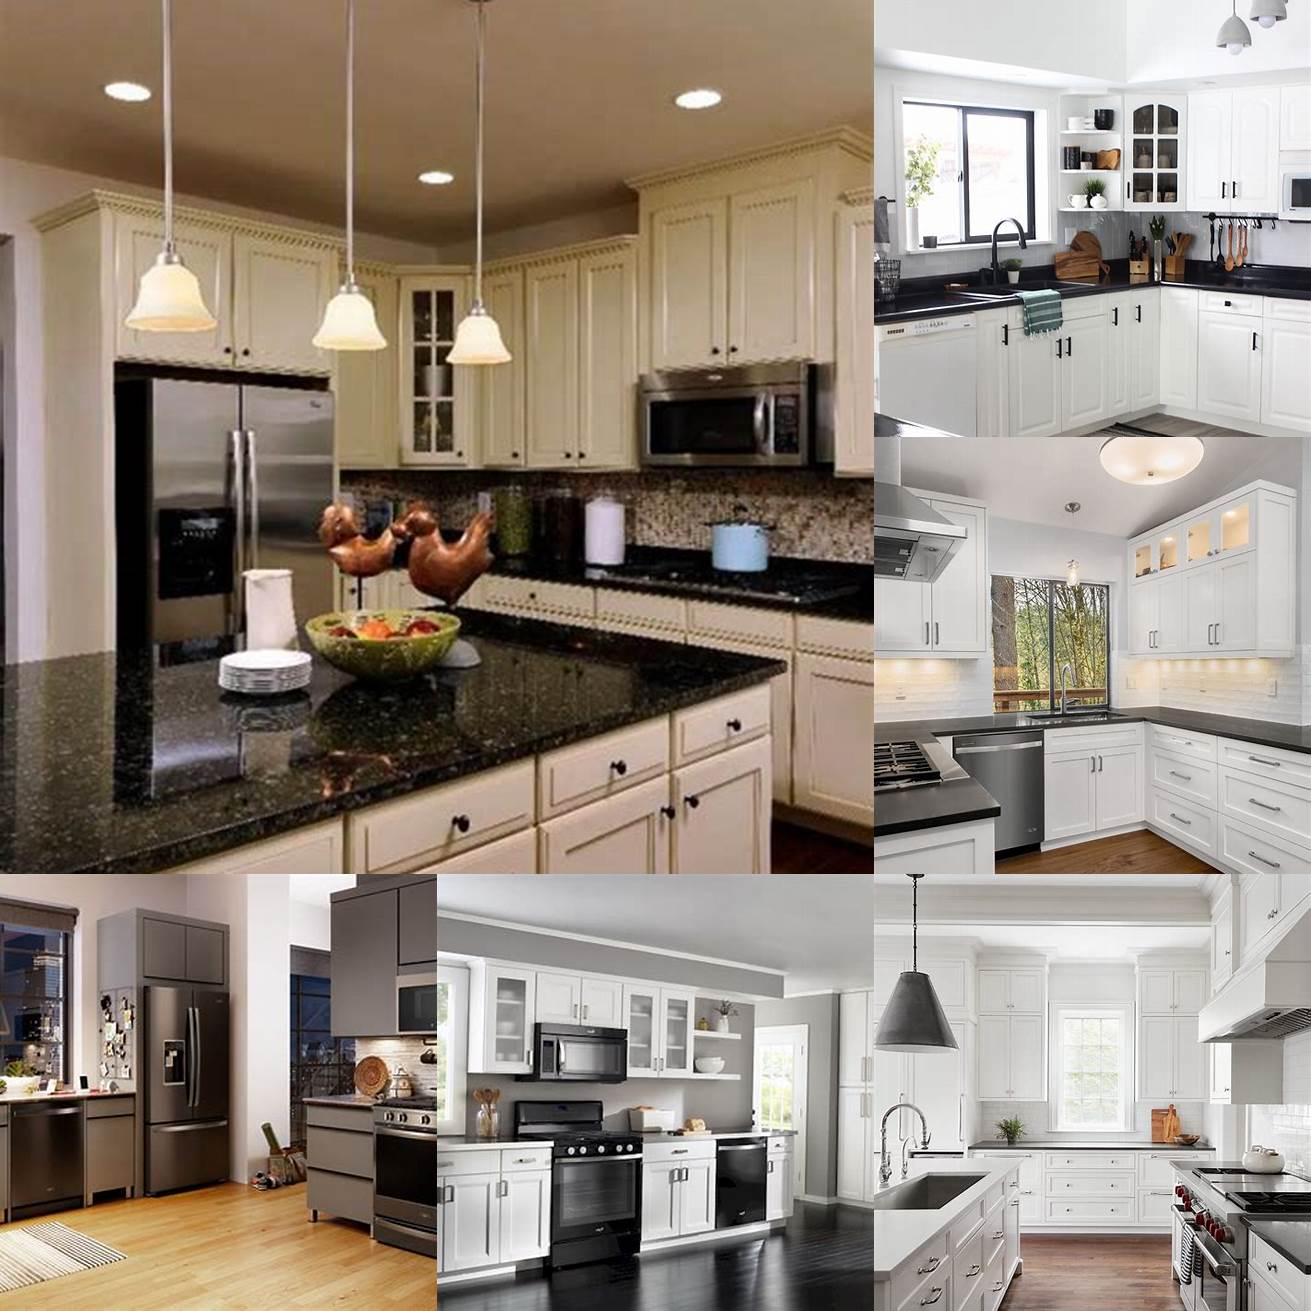 White cabinets with black appliances and lighting fixtures